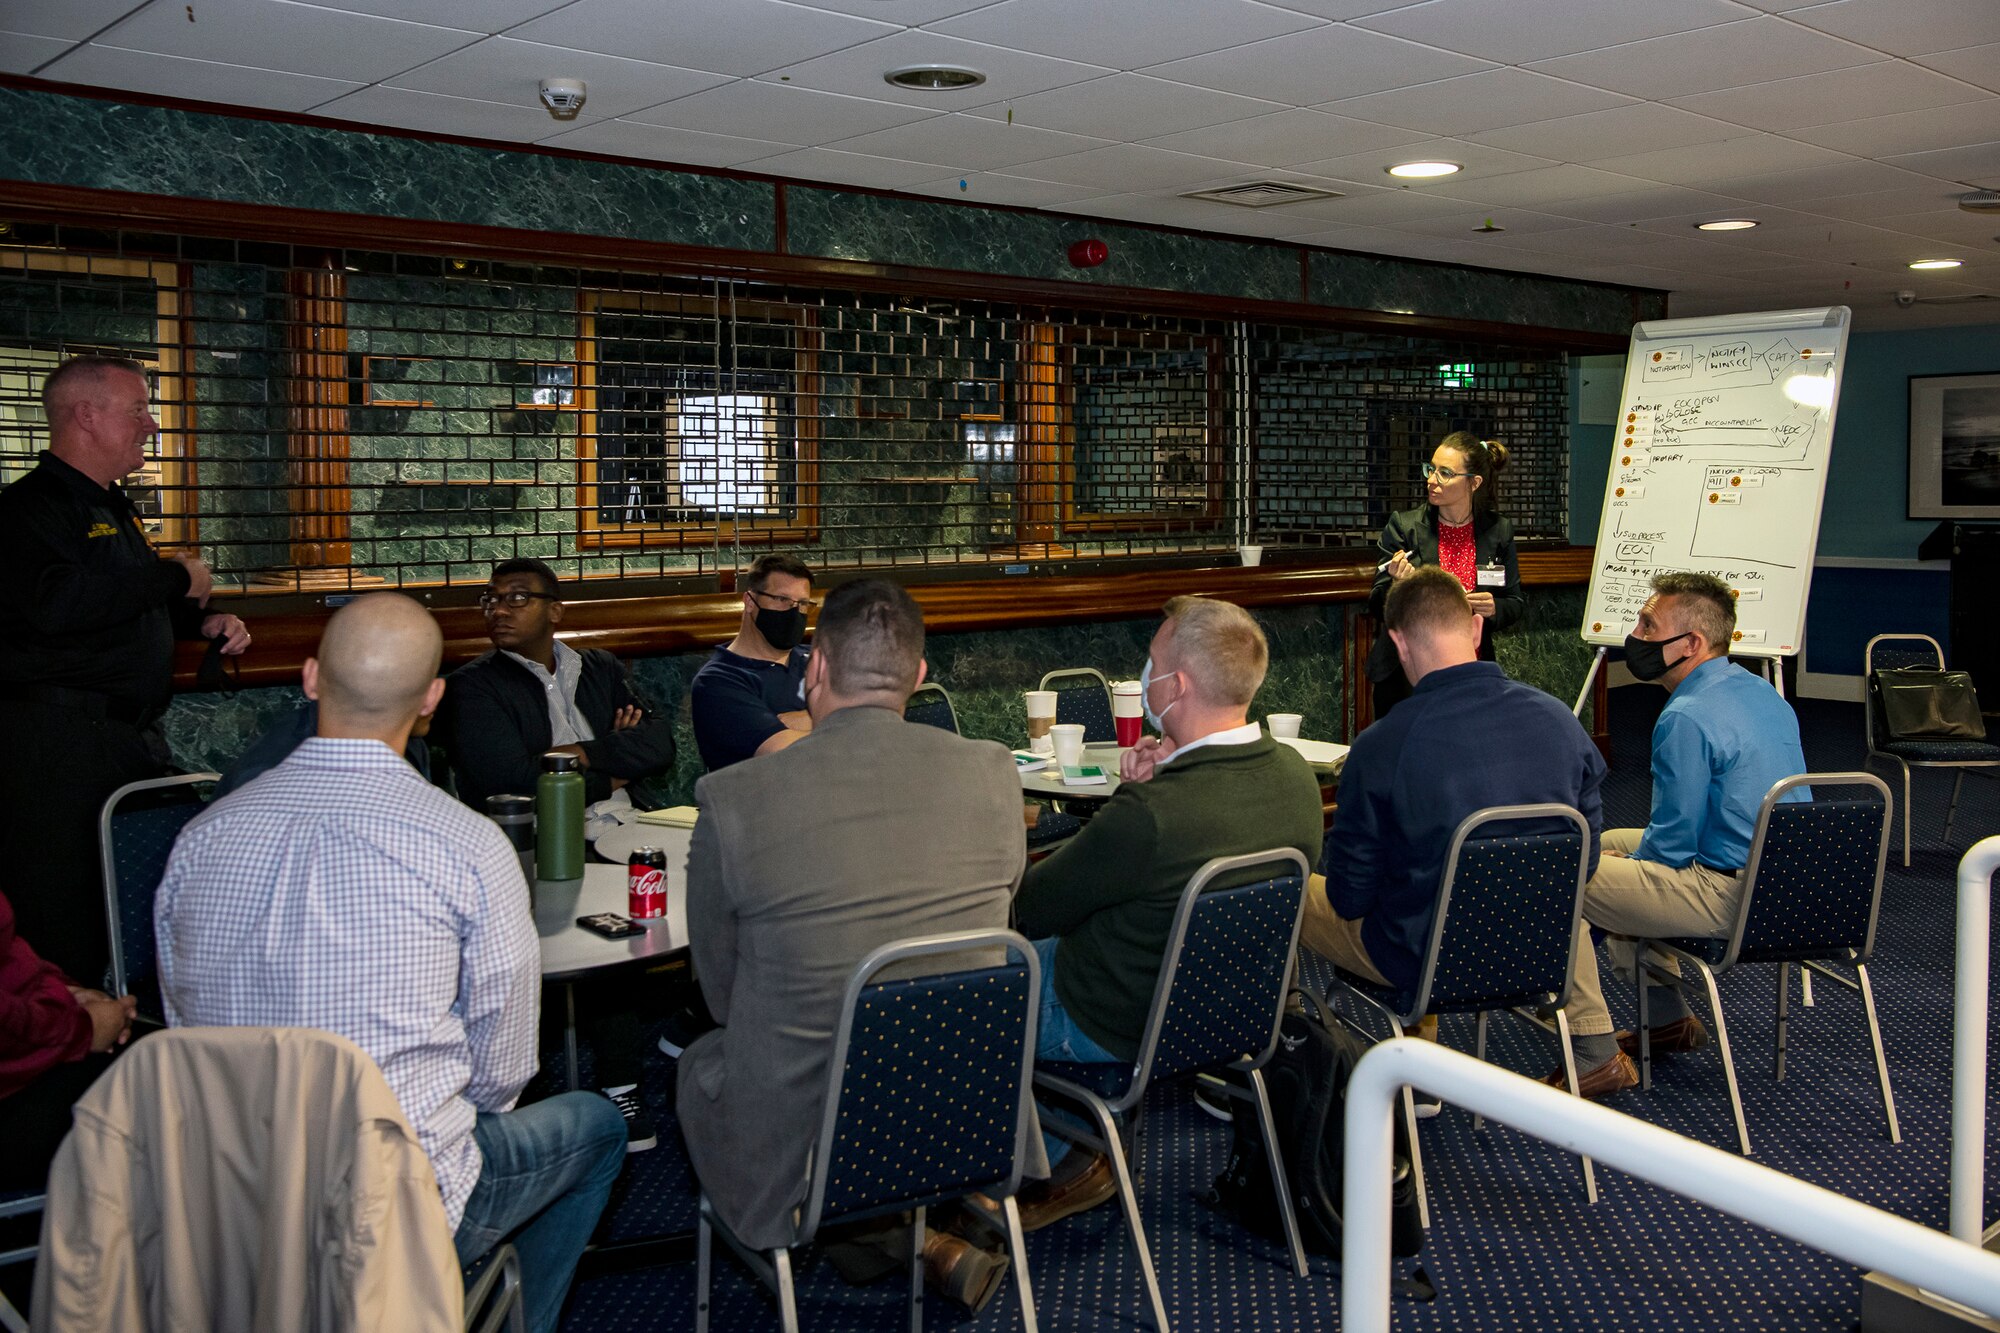 Emergency Management professionals, discuss strategy during an Operational Planning team meeting at RAF Alconbury, England, Sept. 28, 2021. The meeting developed a foundation and framework for command and control operations and reporting within the 501st Combat Support Wing as well as critical communication connection to mission partners. During the meeting, attendees worked together to develop an organizational C2 process across all 501 CSW installations and organizations including mission partners and geographically separated units. (U.S. Air Force photo by Senior Airman Eugene Oliver)